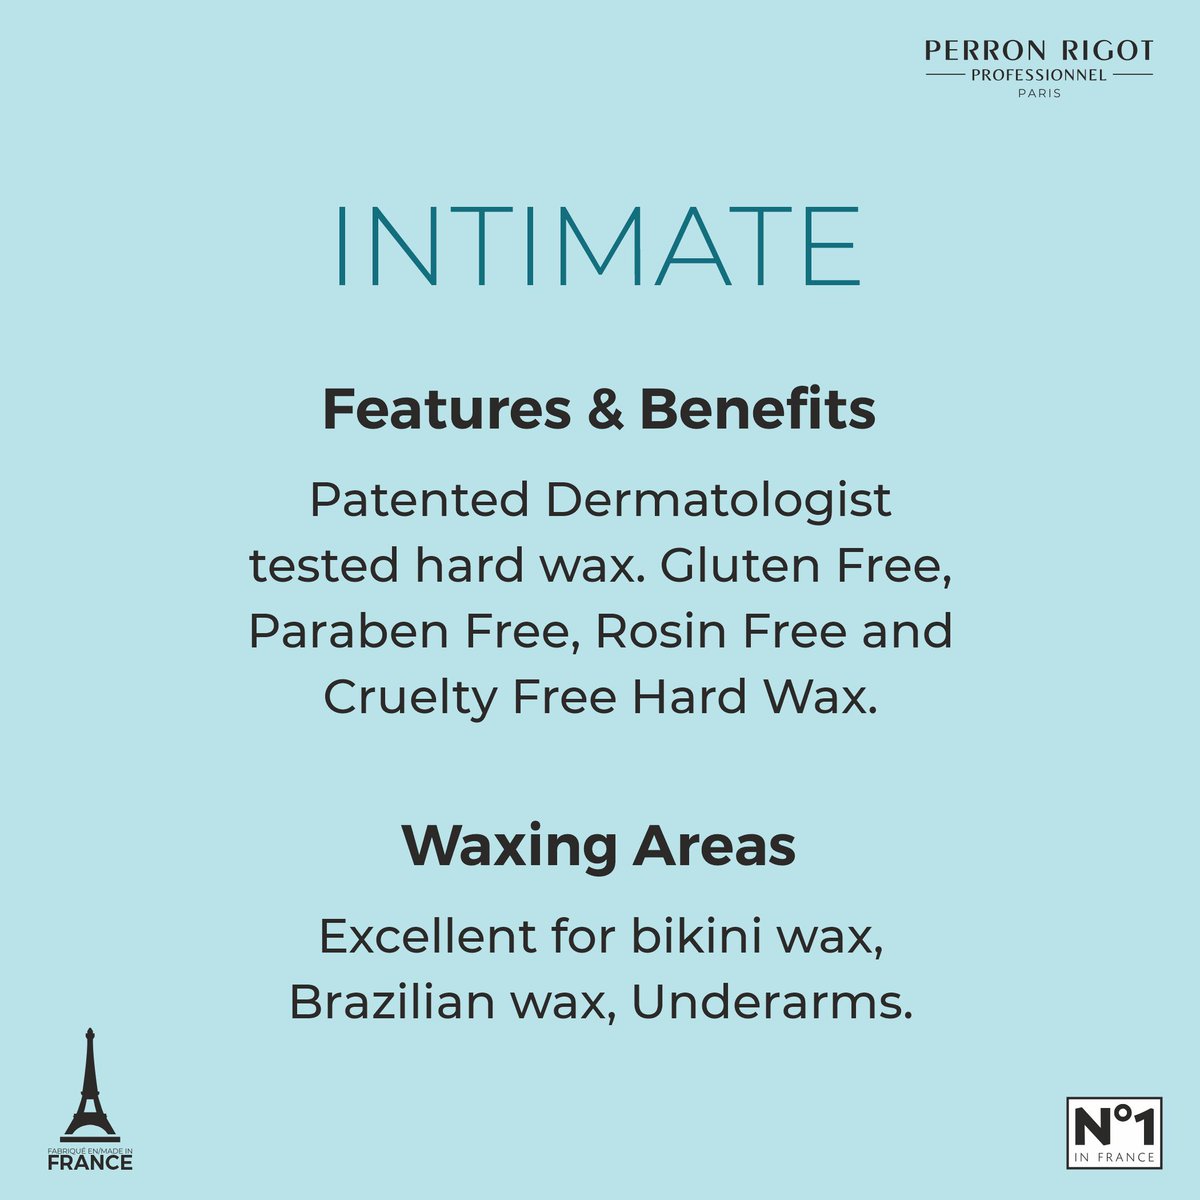 Smoothness awaits with Cirepil Intimate. Our wax makes hair removal a breeze, leaving you feeling confident and carefree.

#perronrigot #perronrigotwax #cirepilbyperronrigot #perronrigotprofessionnel #perronrigotwaxing #facewax